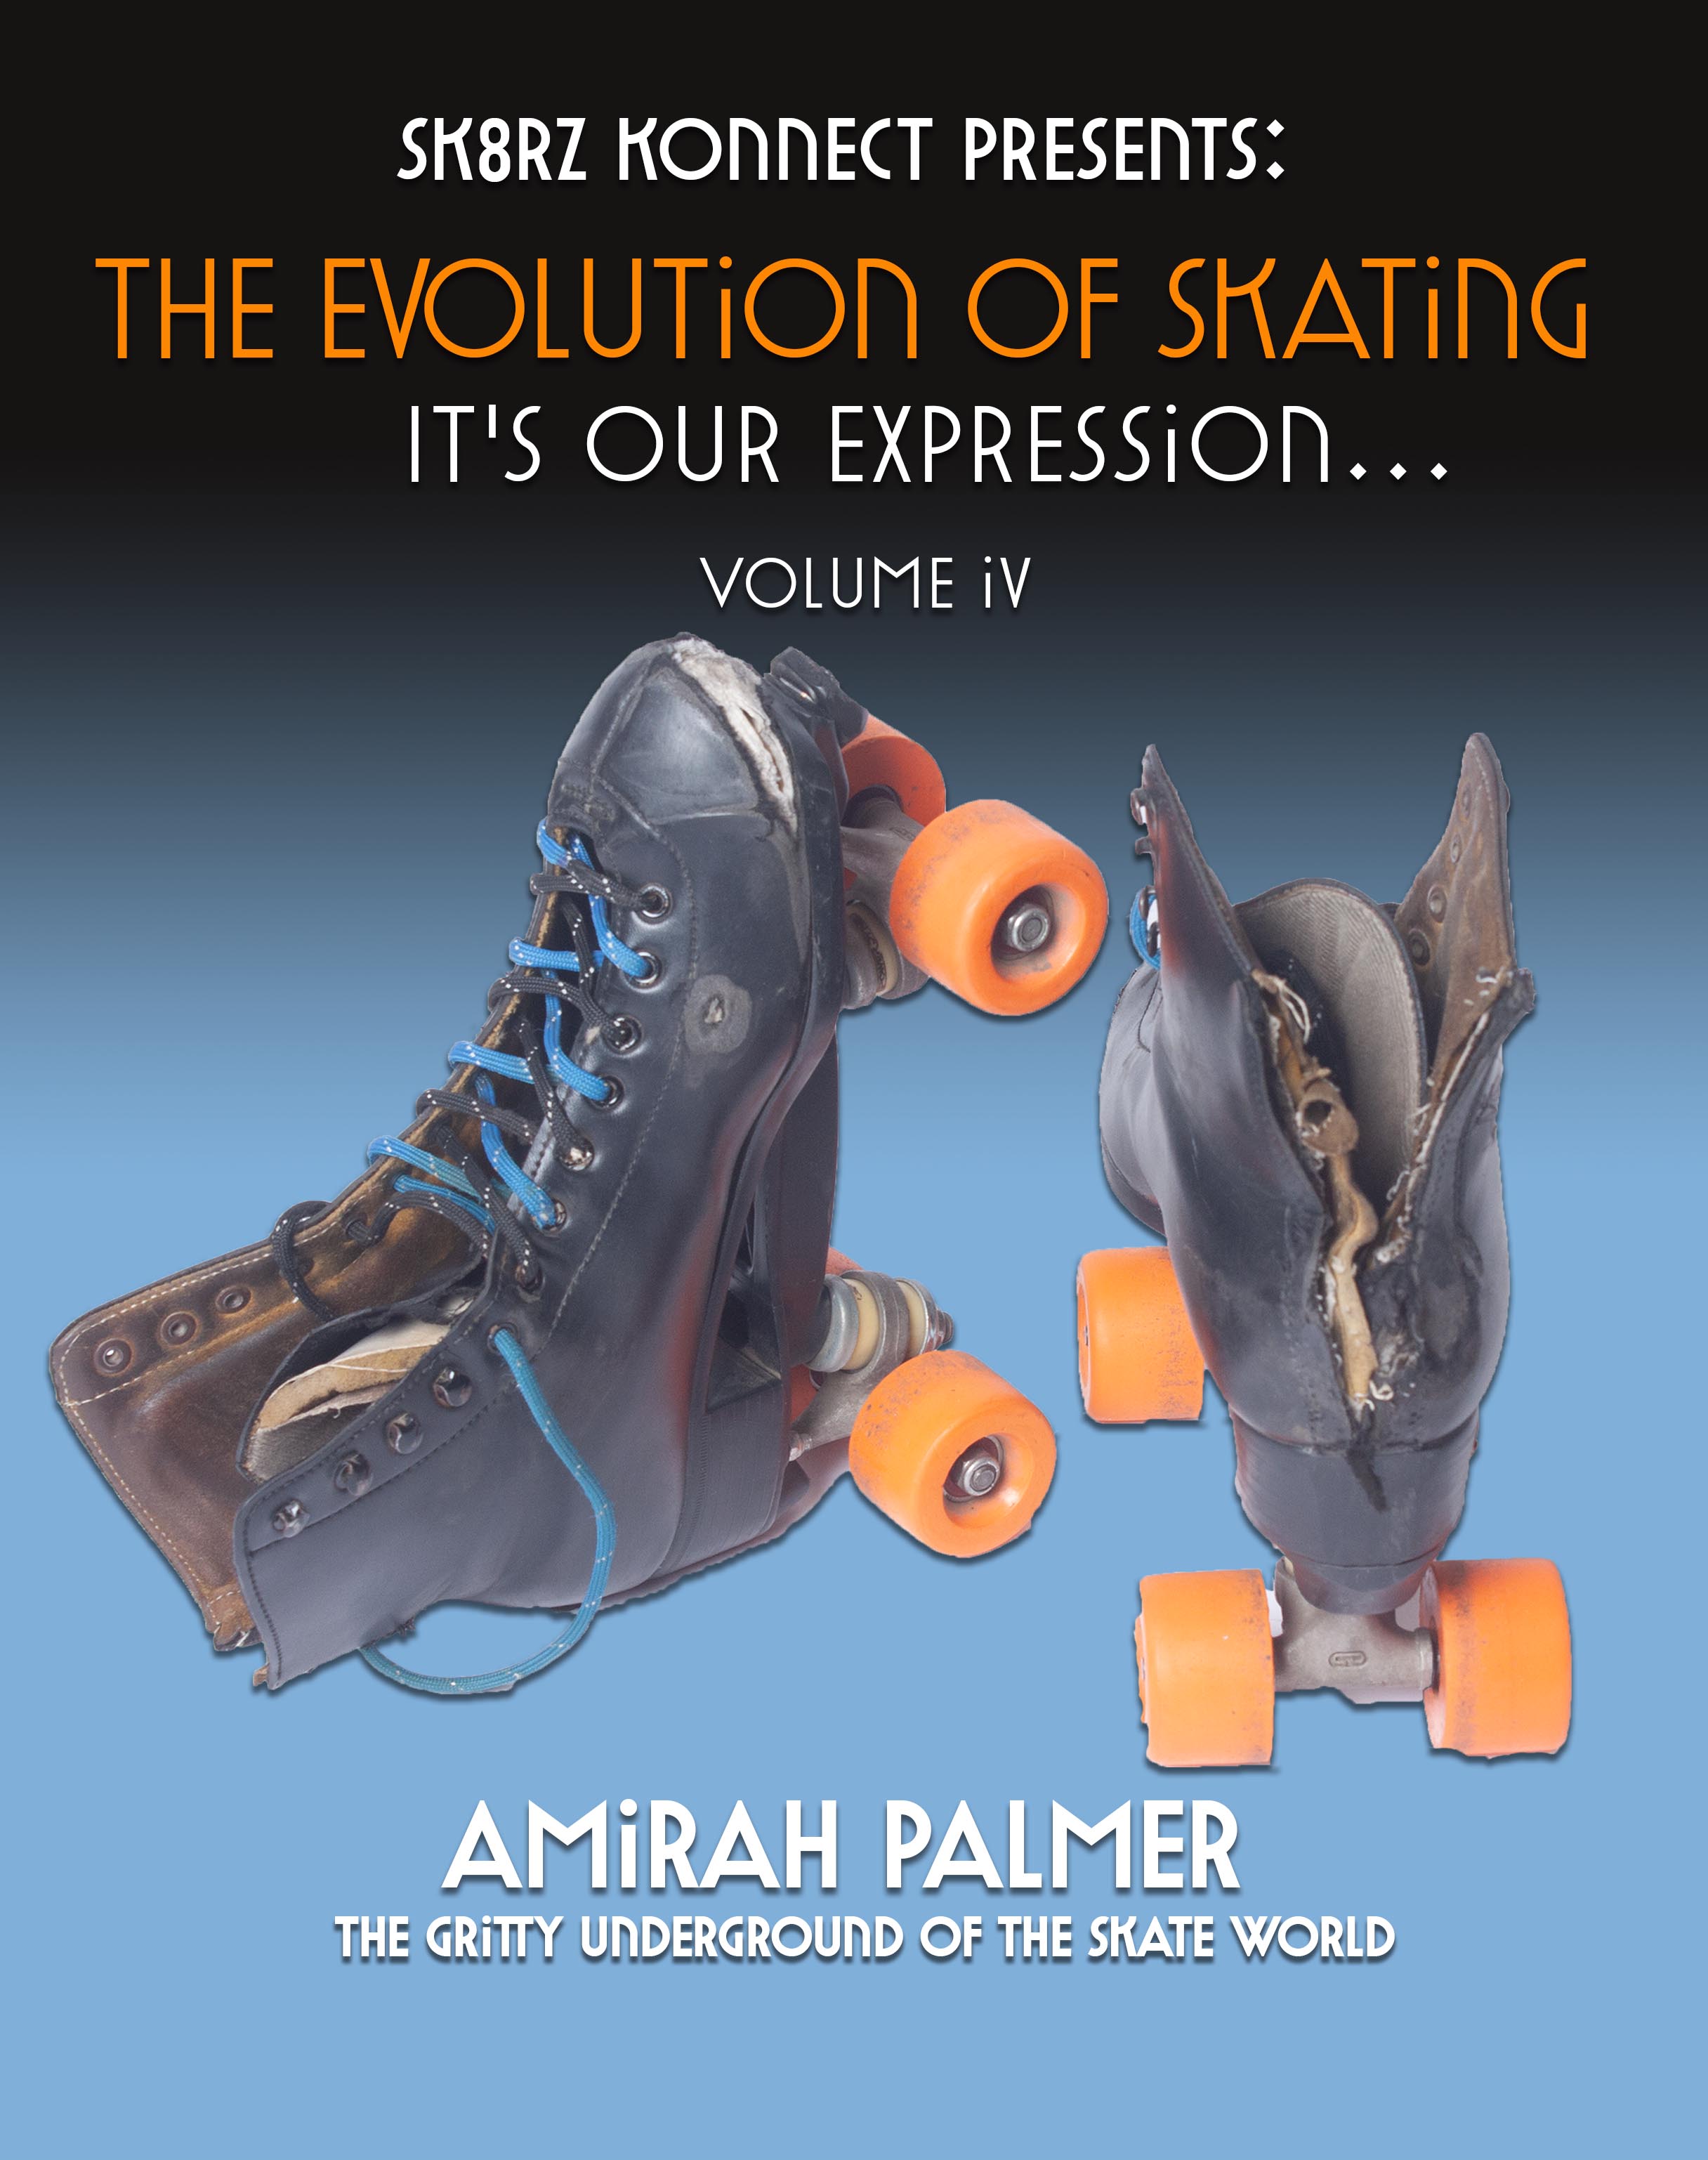 The Evolution of a Culture - Roller Skating, passion and artistry